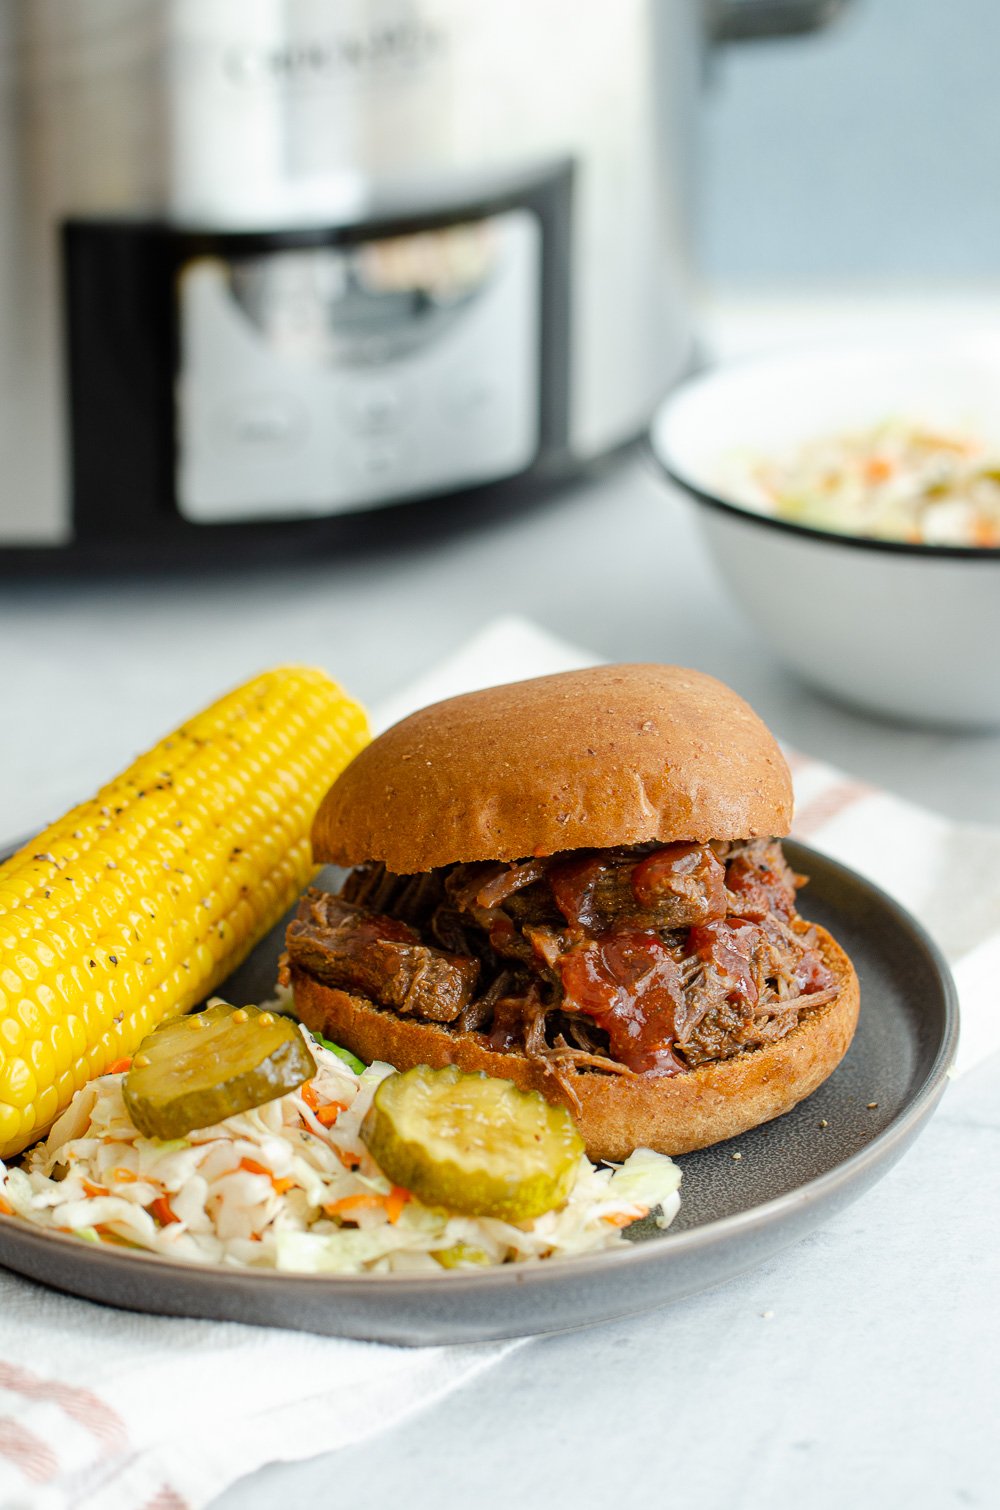 Slow Cooker BBQ shredded beef on a bun with corn on the cob.